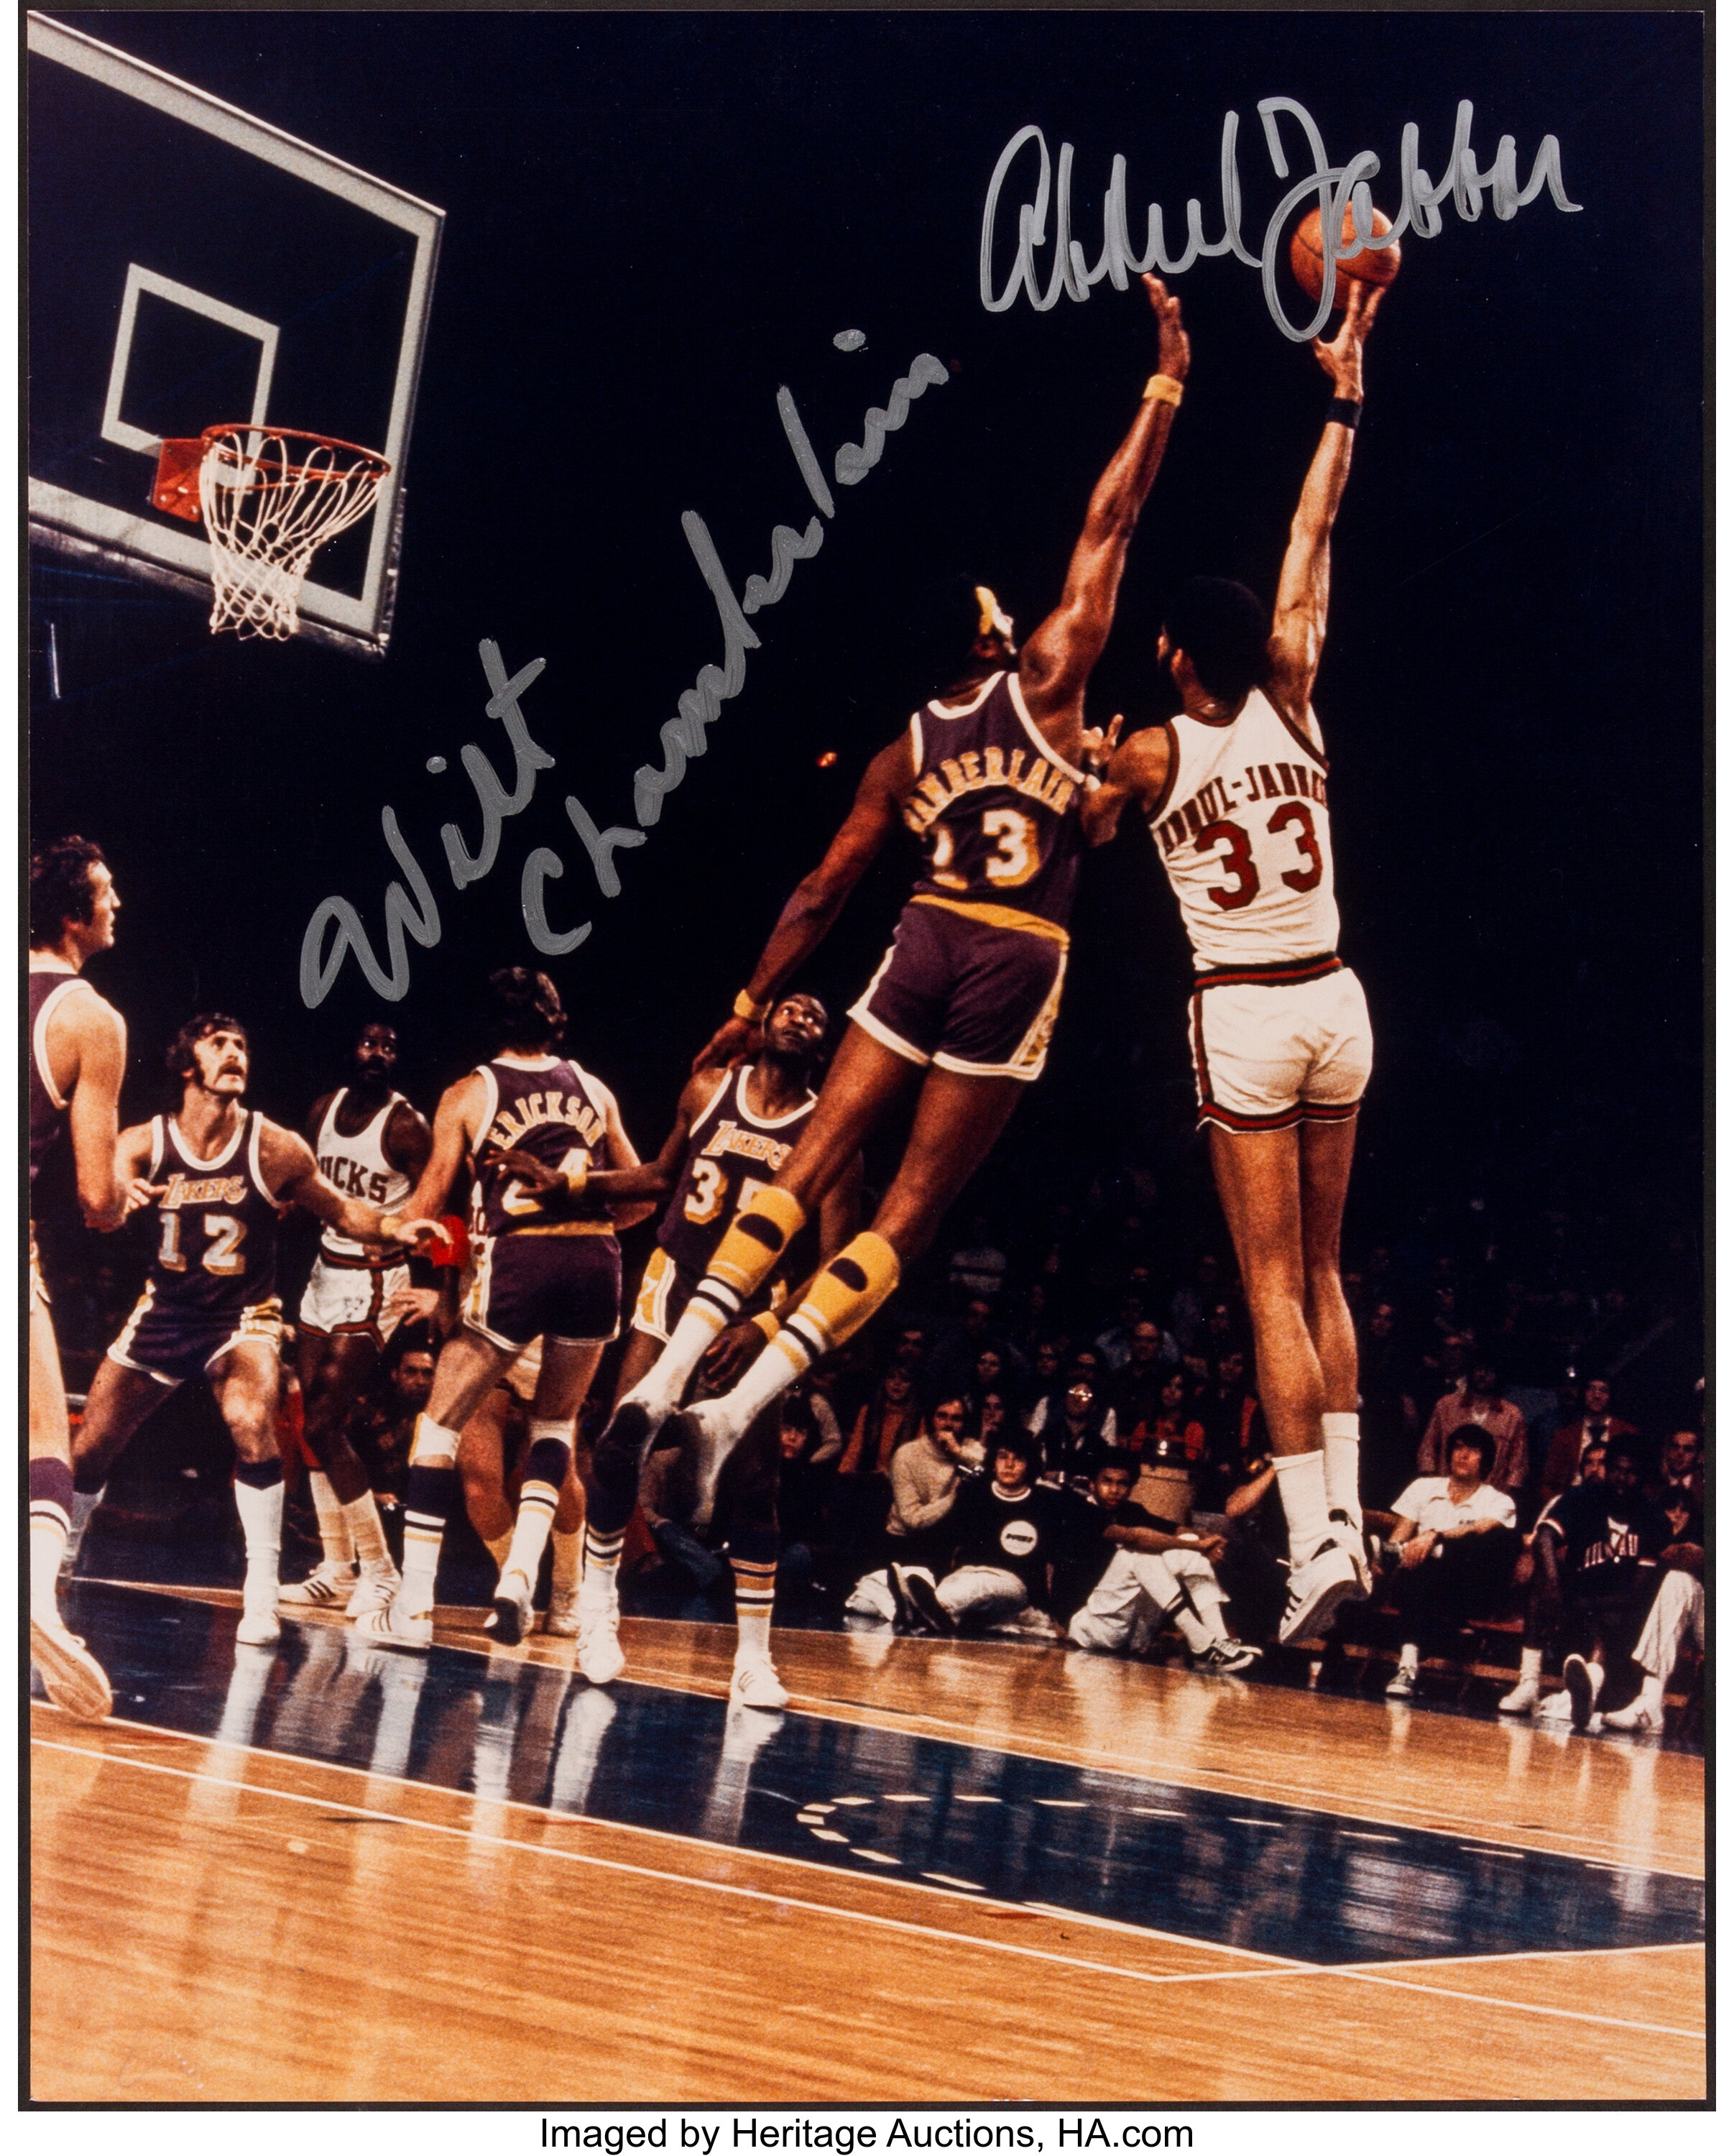 Wilt Chamberlain guarded by Kareem Abdul Jabbar by Retro Images